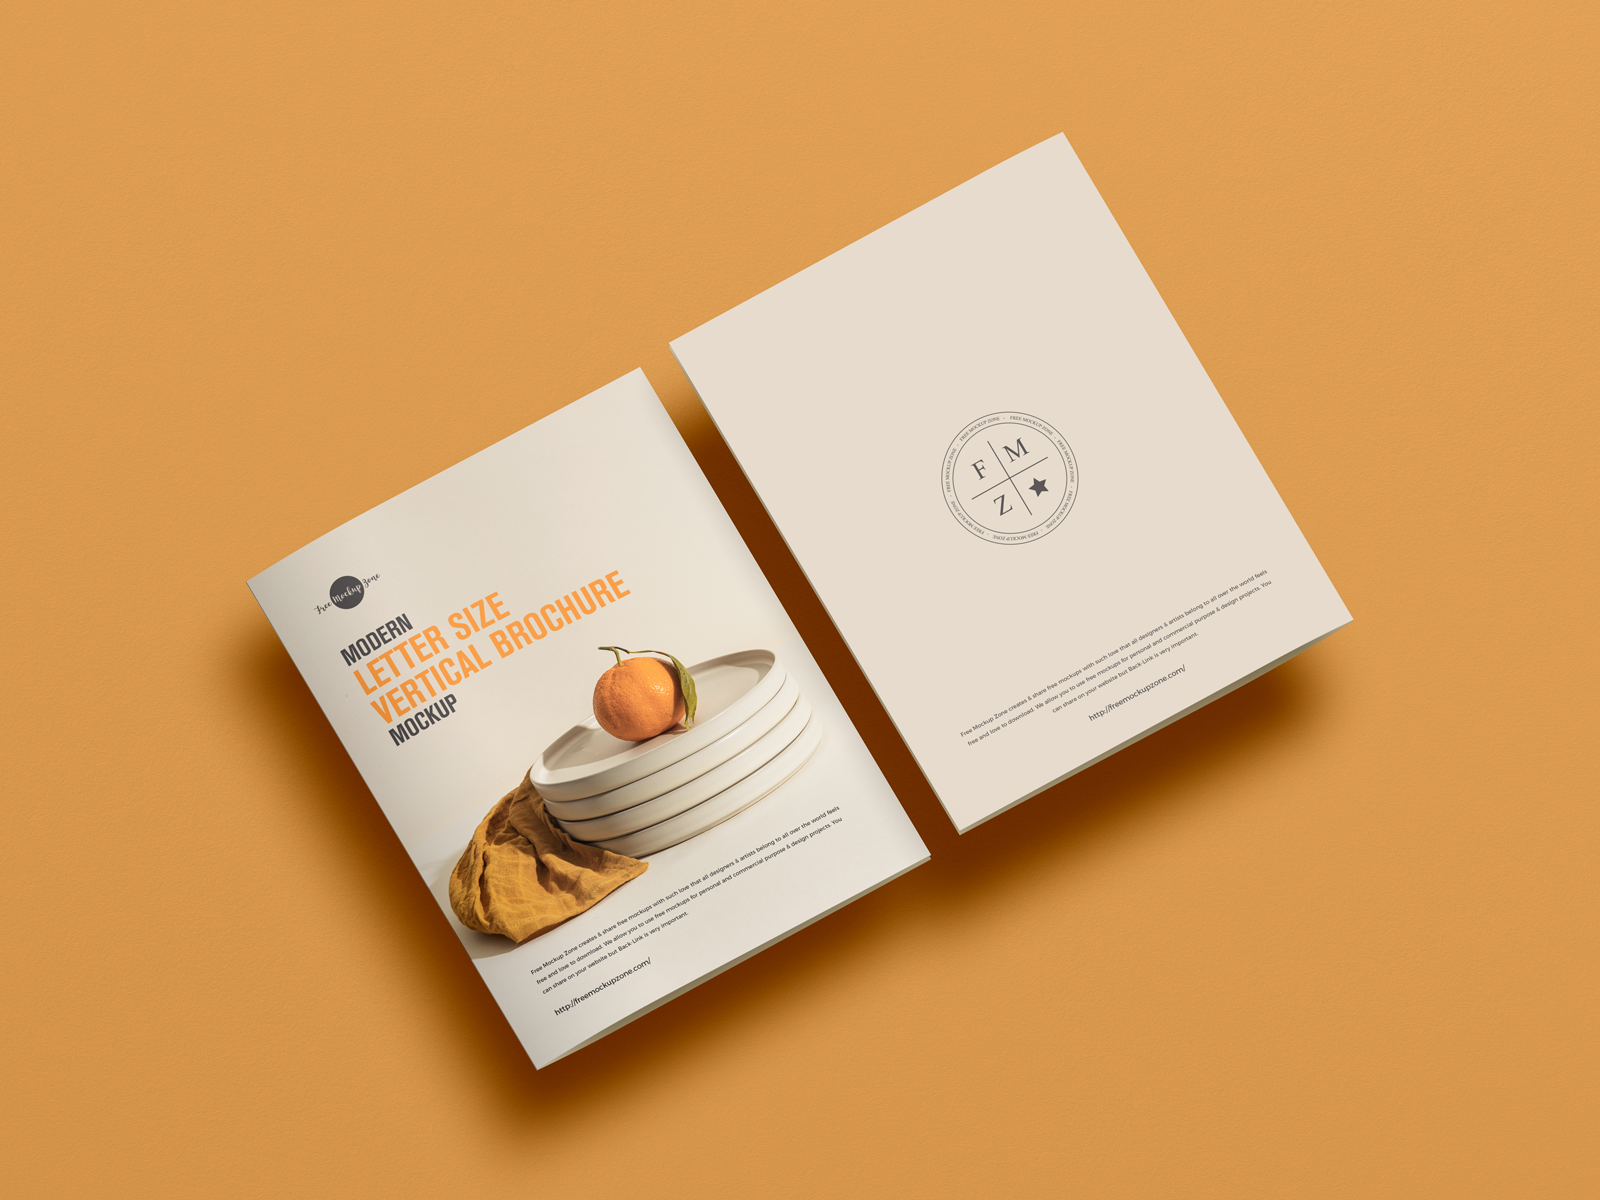 Download Free Letter Size Brochure Mockup By Free Mockup Zone On Dribbble